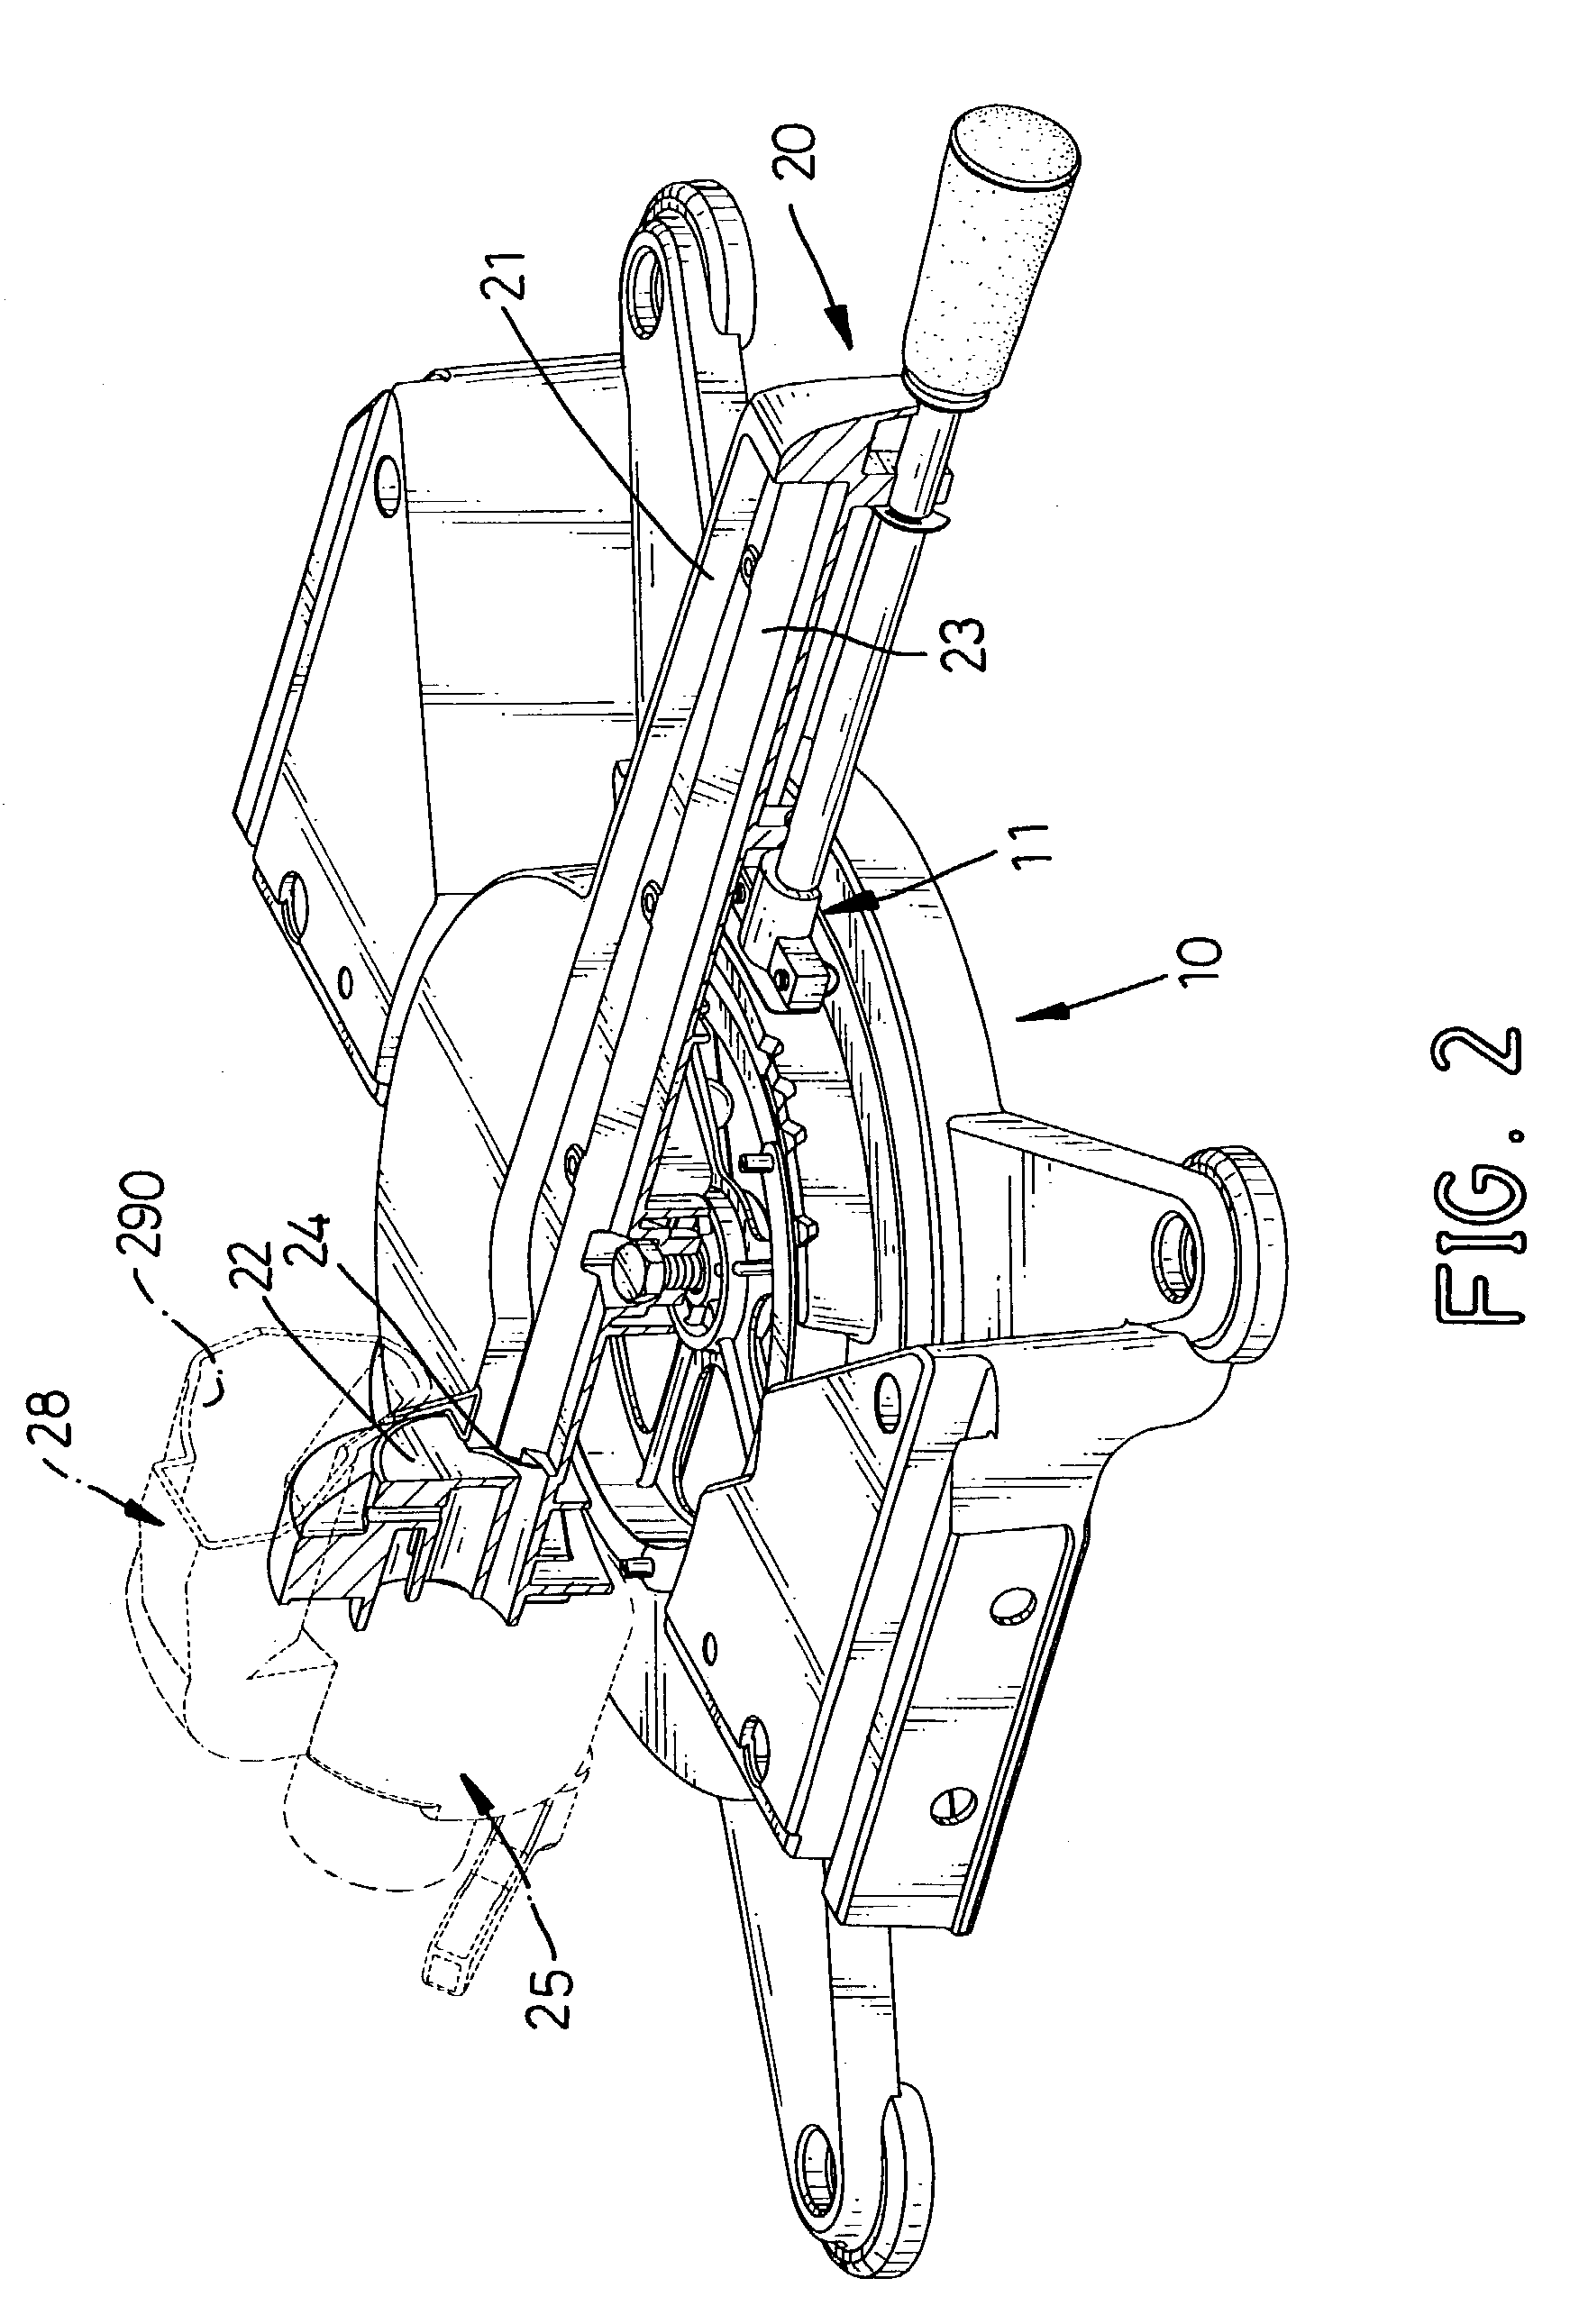 Sawdust collection assembly for a compound miter saw